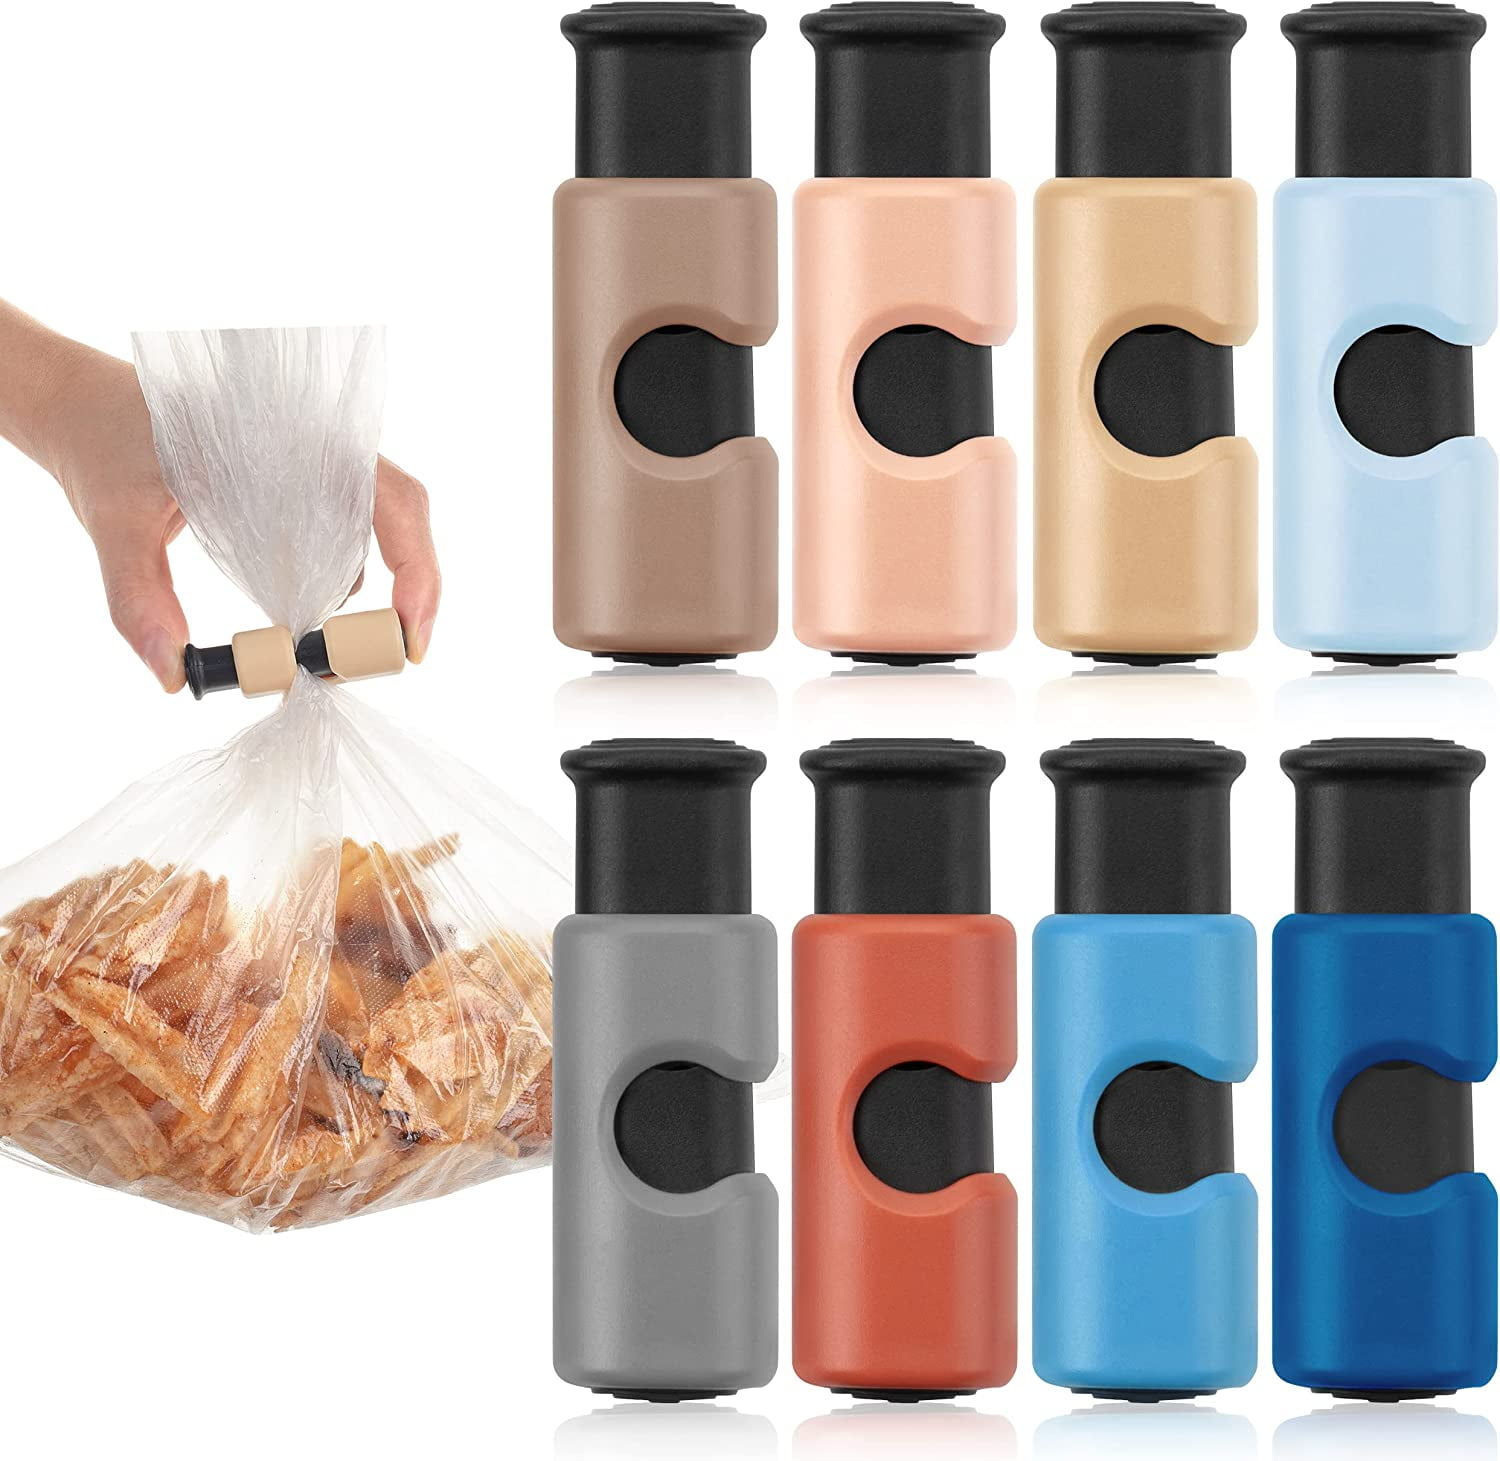 Reusable Plastic Bread Bag Clips Keep Your Food Fresh, Also usable as Food  Storage Bag Clips - 7/8 x 1 inches - 100 Pieces